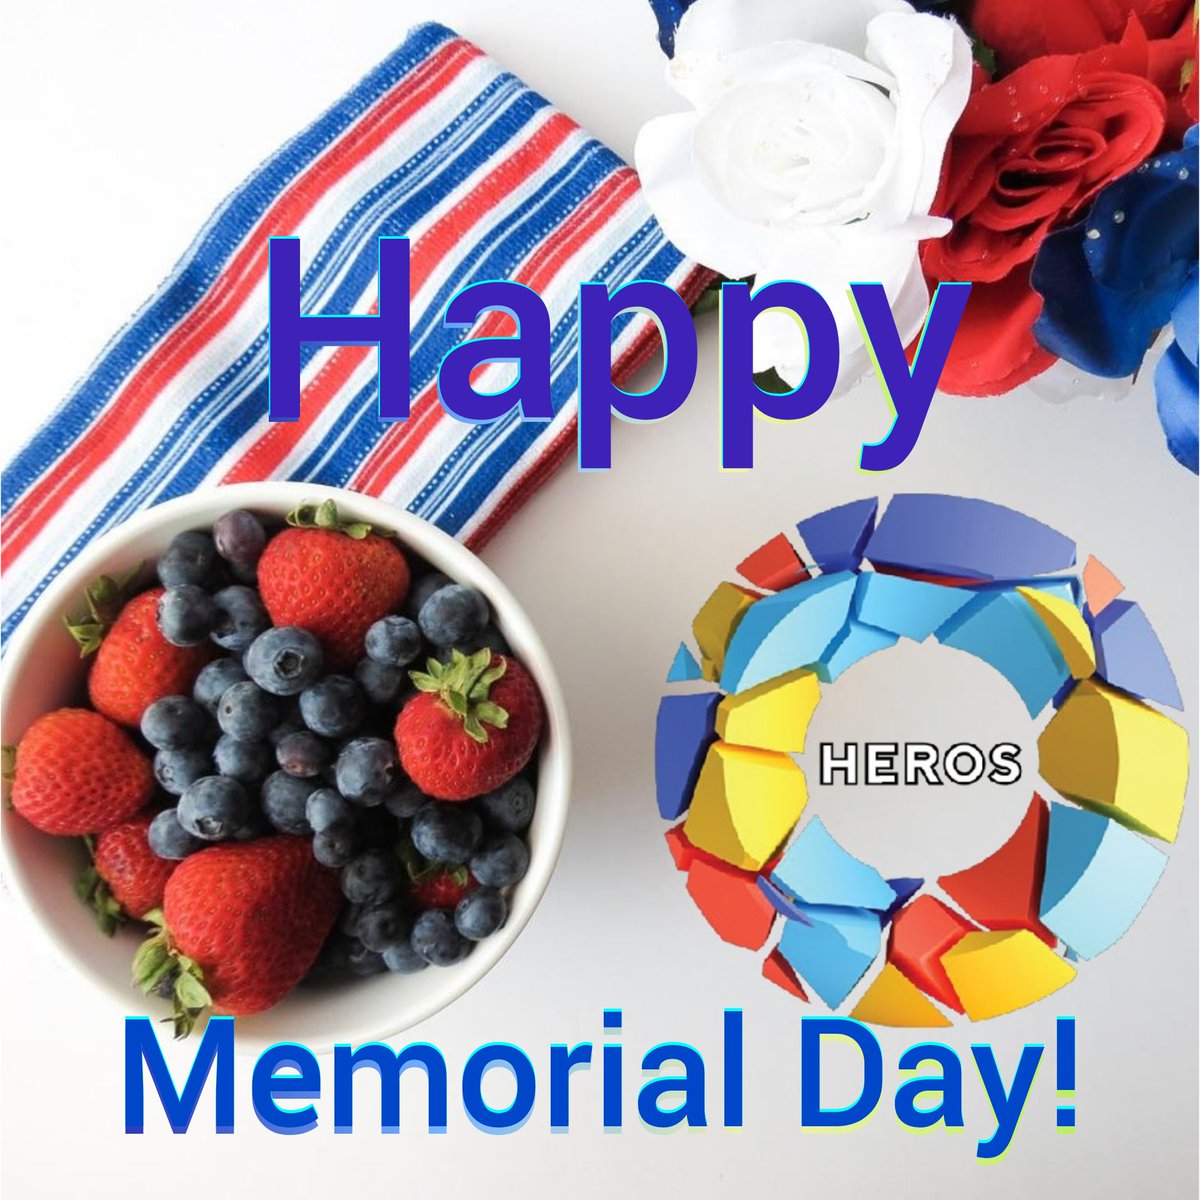 Wishing everyone a fantastic and safe Holiday weekend. #HappyMemorialDayWeekend #CryptoWithaHeart